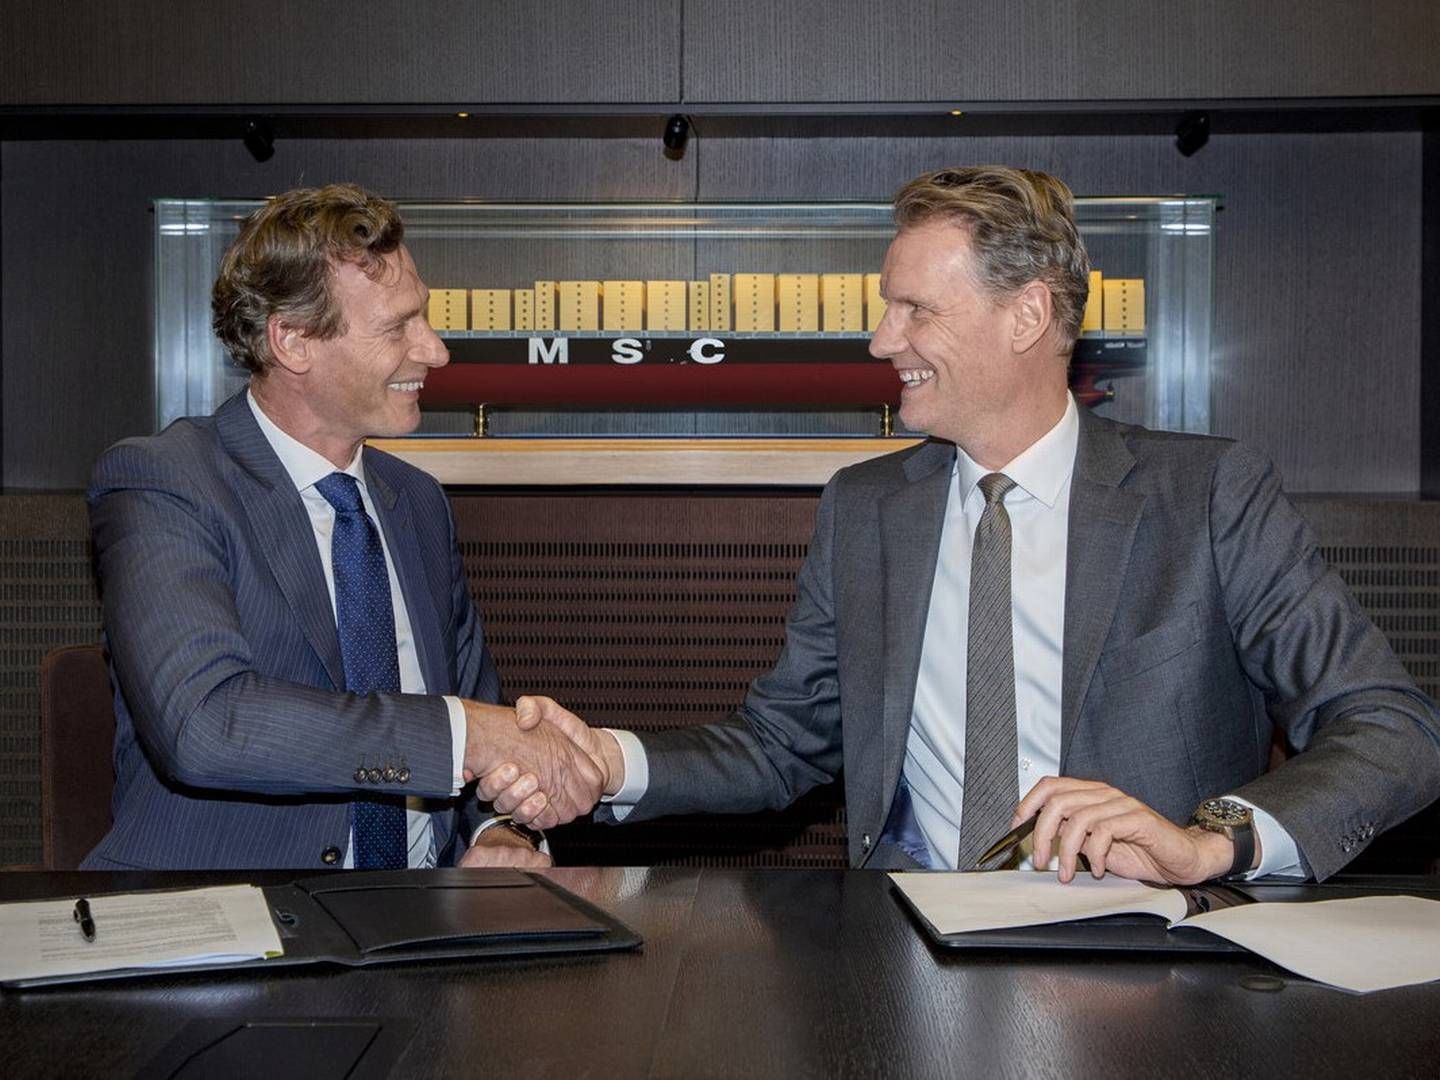 DB Schenker's global head of air and ocean freight, Thorsten Meincke, and MSC CEO Søren Toft signed a deal on biofuels earlier in the month at MSC headquarters in Geneva. | Photo: MSC, Oliver O'Hanlon.